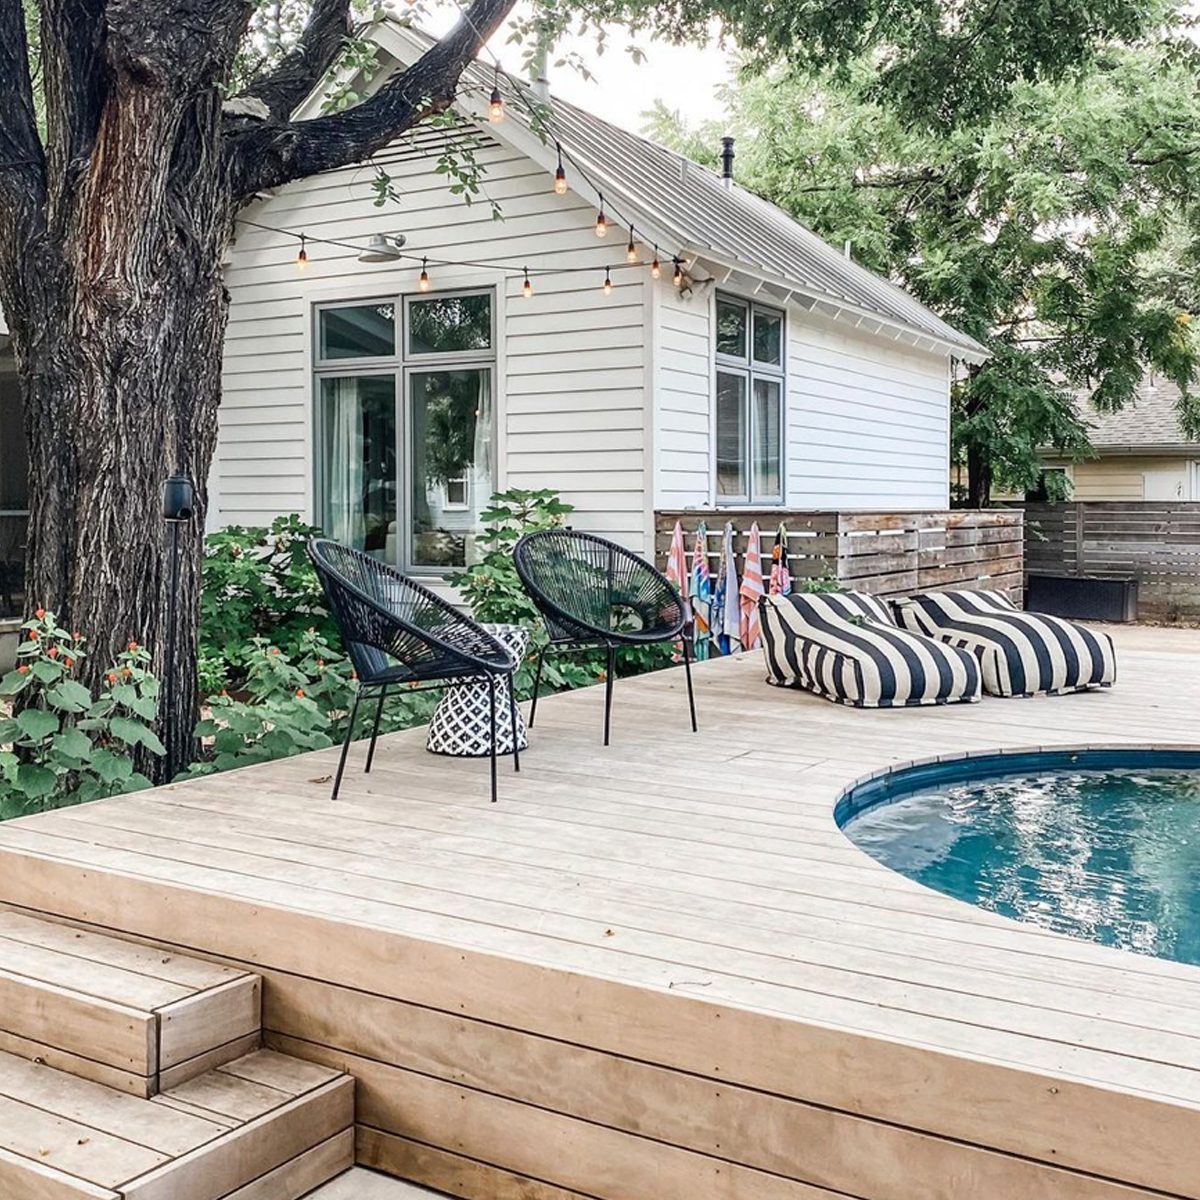 Mismatched Outdoor Seating Courtesy Harvey House Austin Instagram